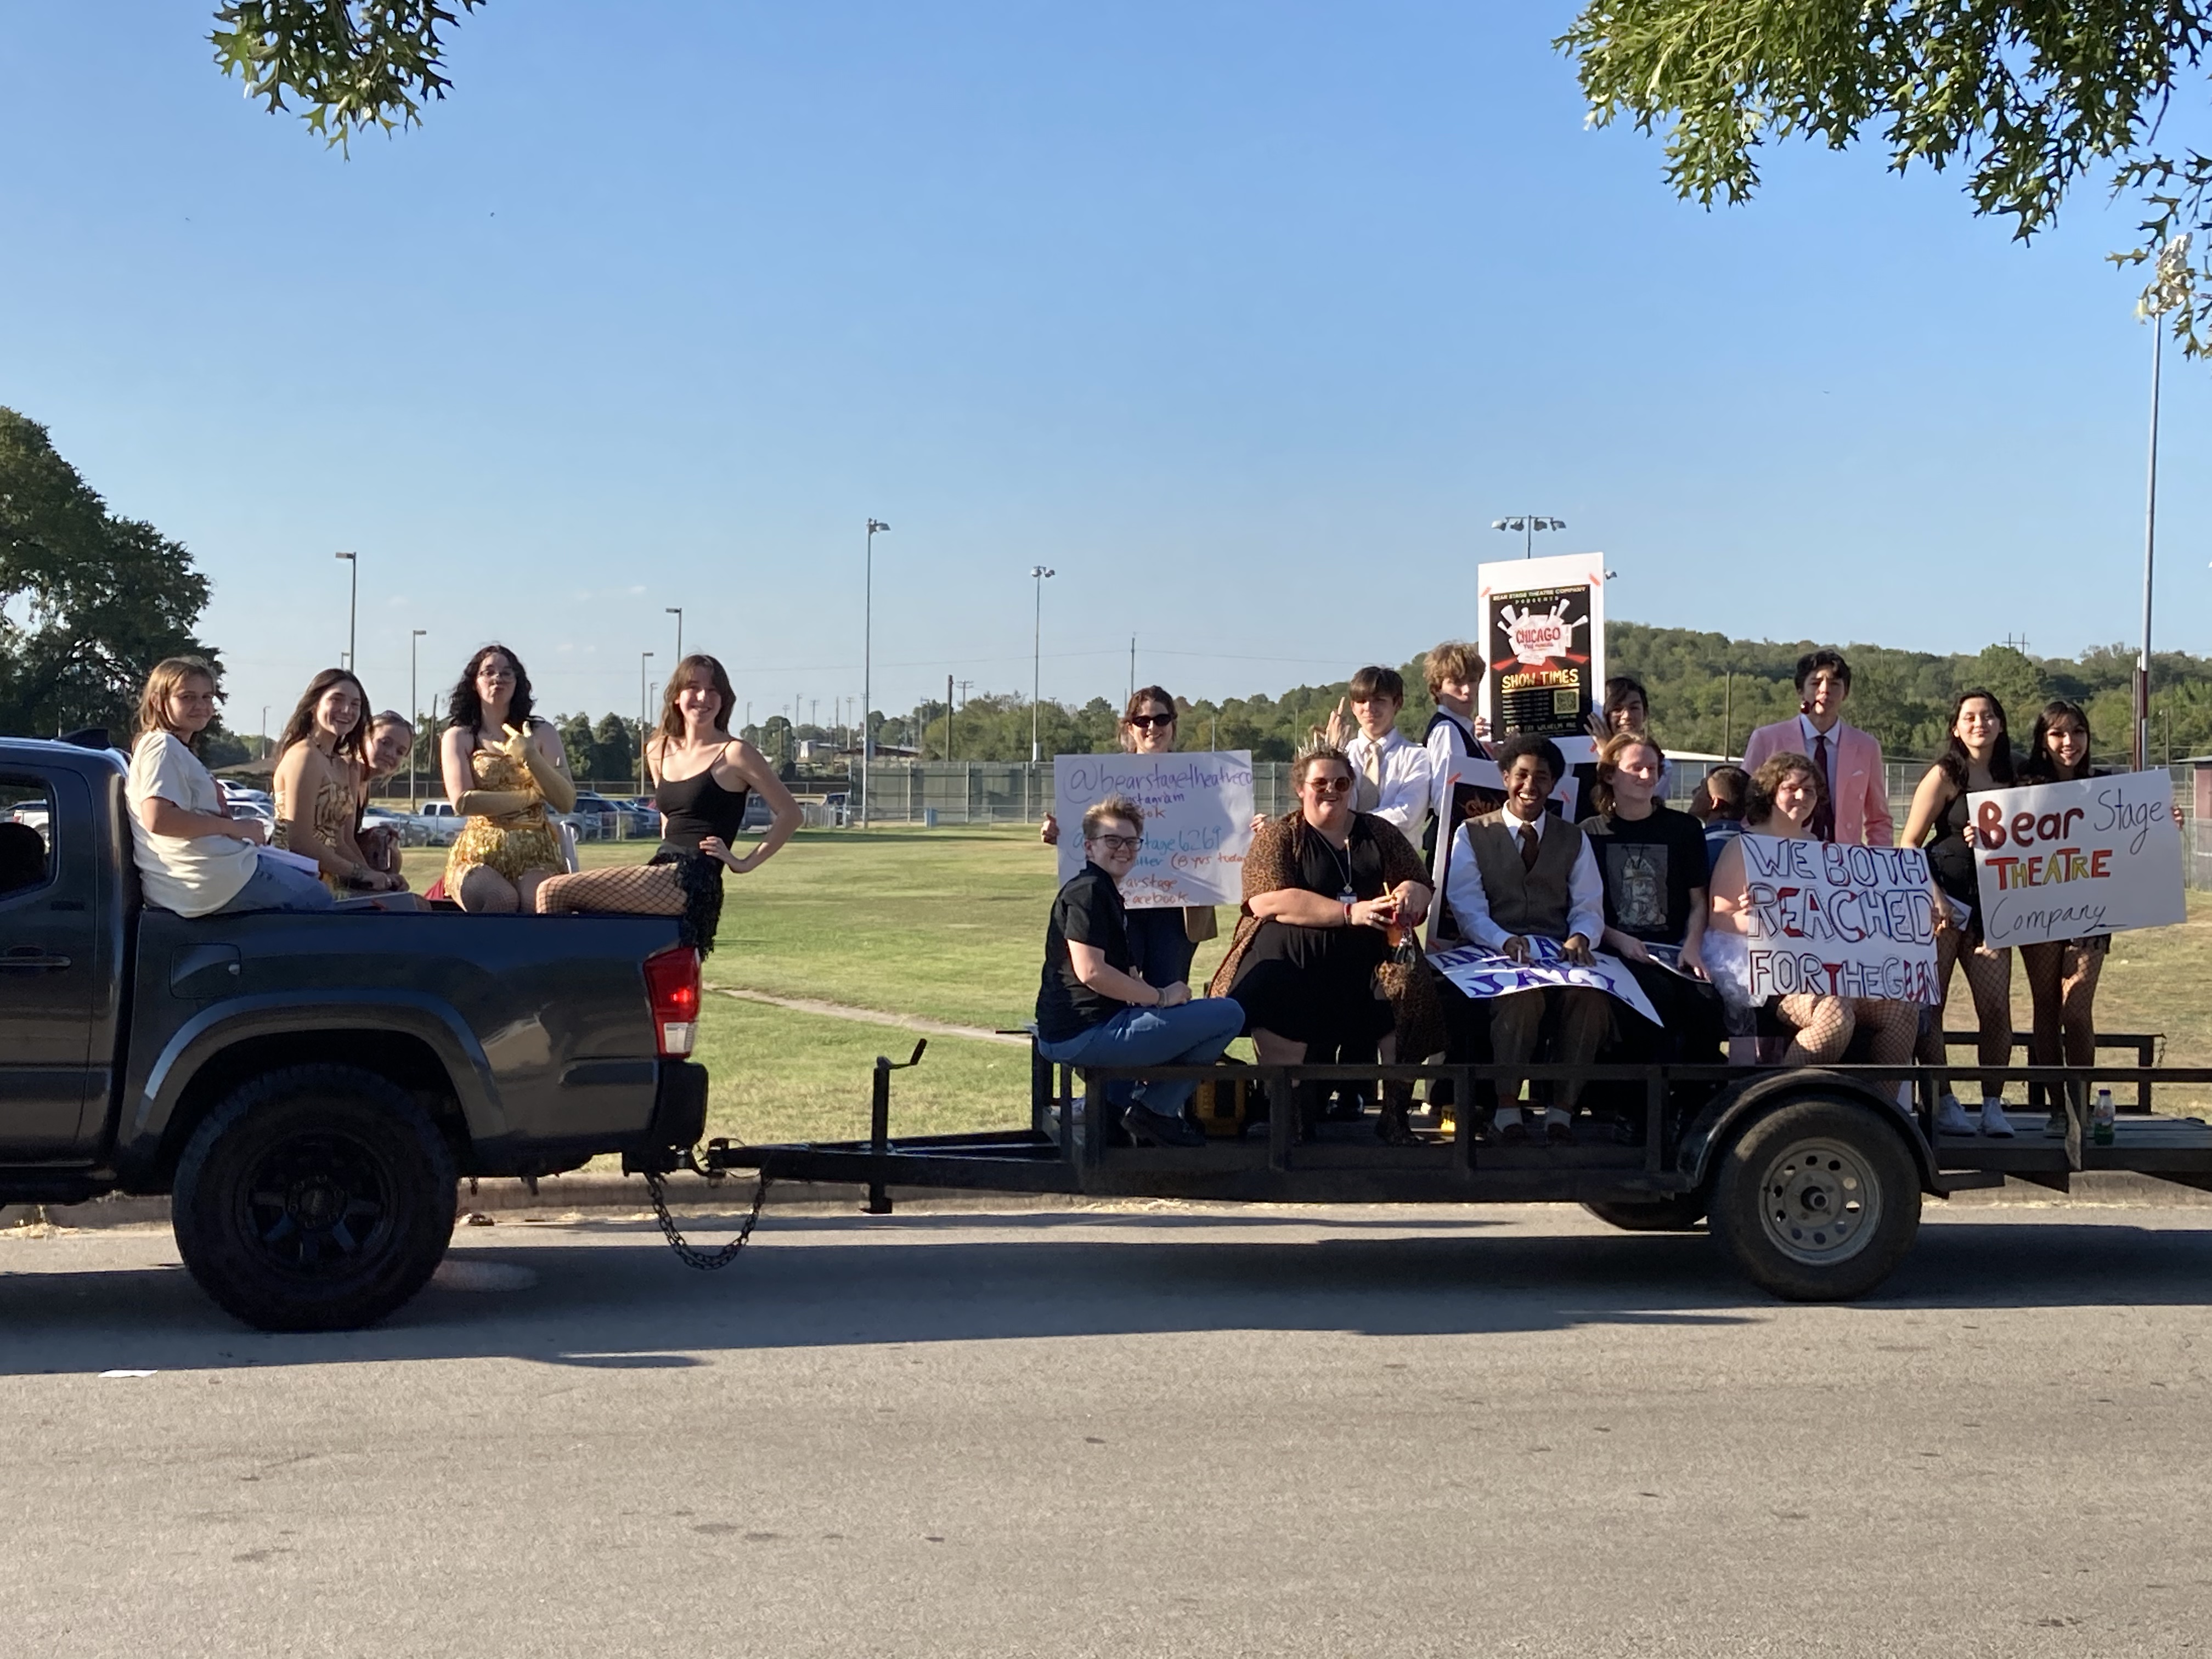 Bear Stage Theatre Co. cruises through Bastrop once again in full costume on the September 21st HOCO Parade!